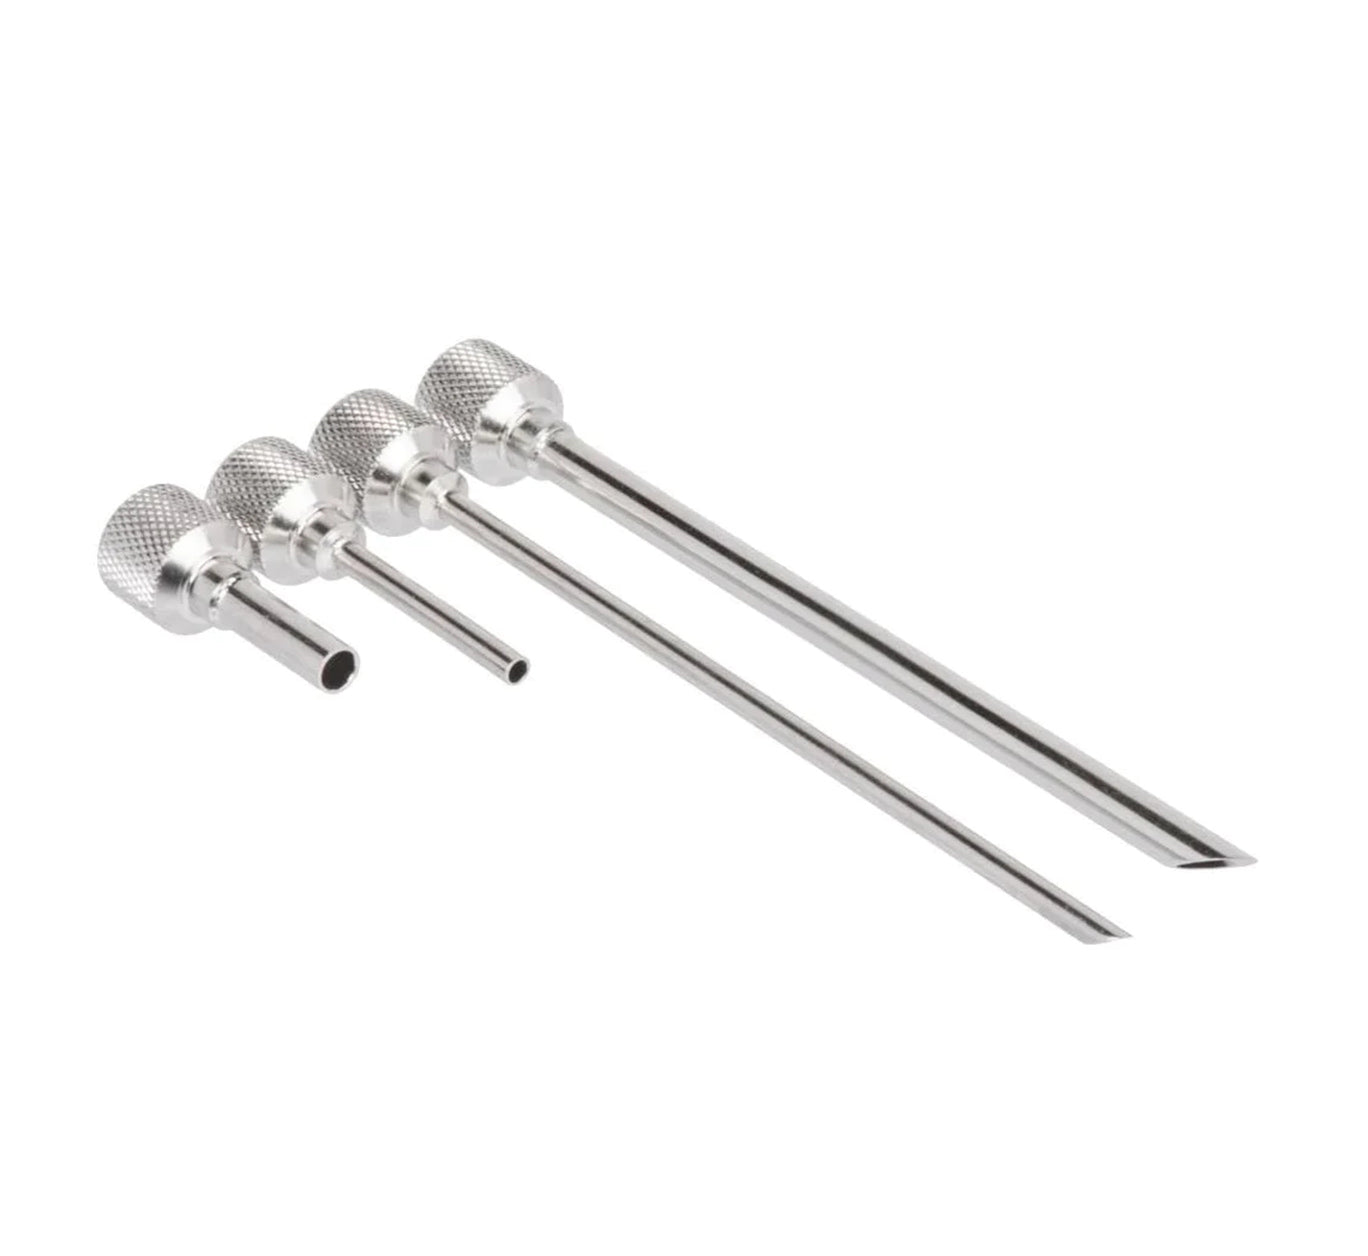 SupremeWhip Precision Injector Tips (4 Pack)